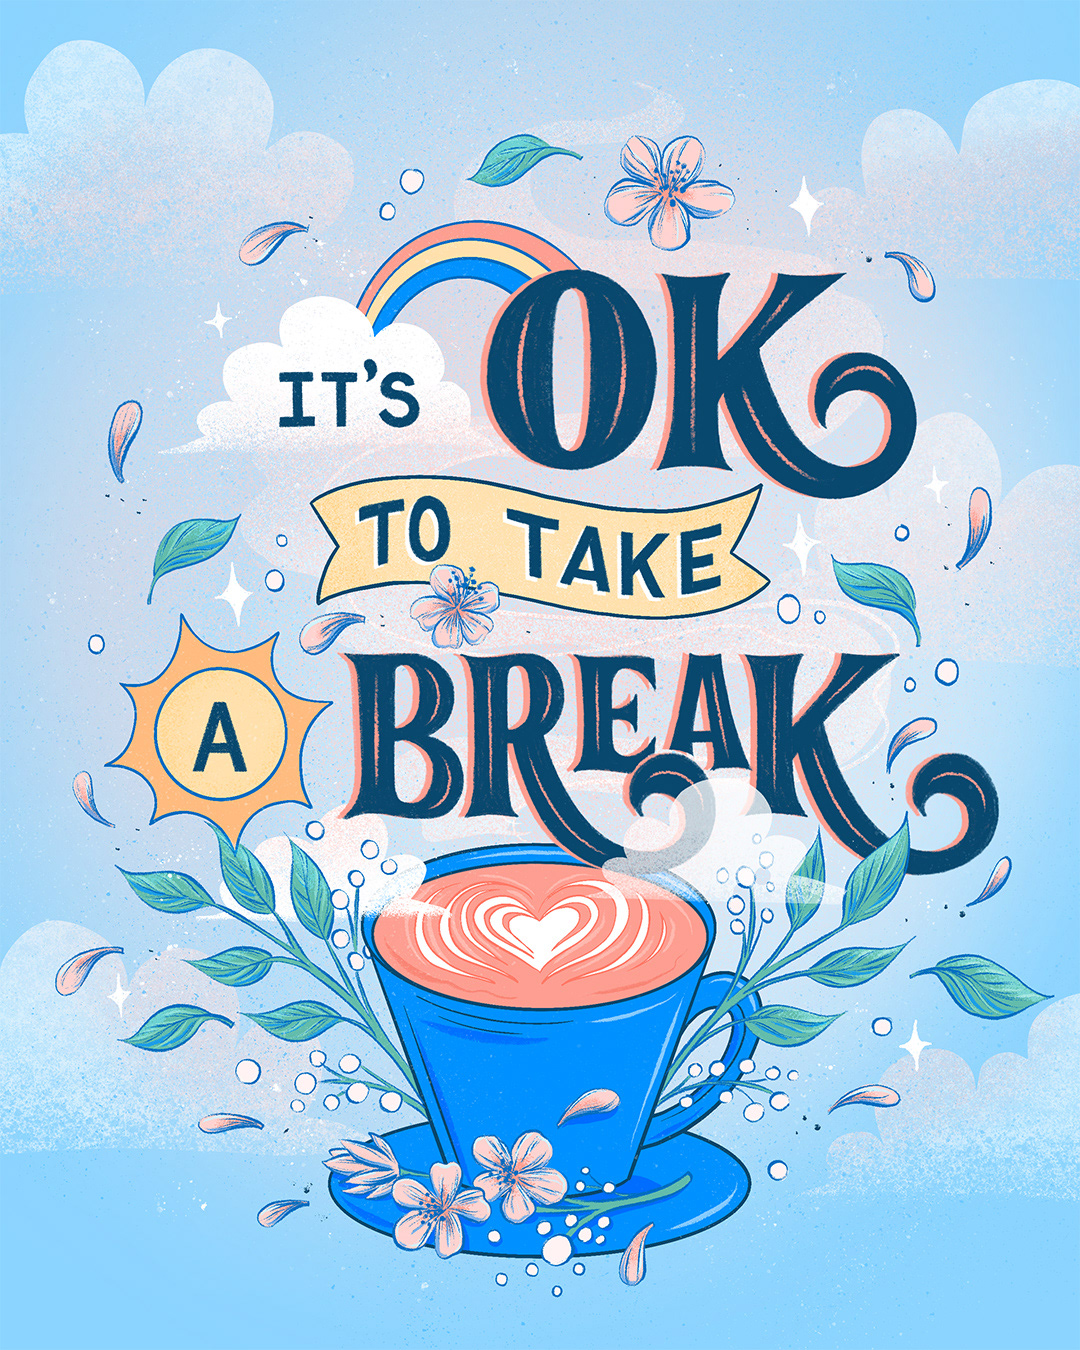 Digital hand lettering and illustration with the phrase "it's okay to take a break"